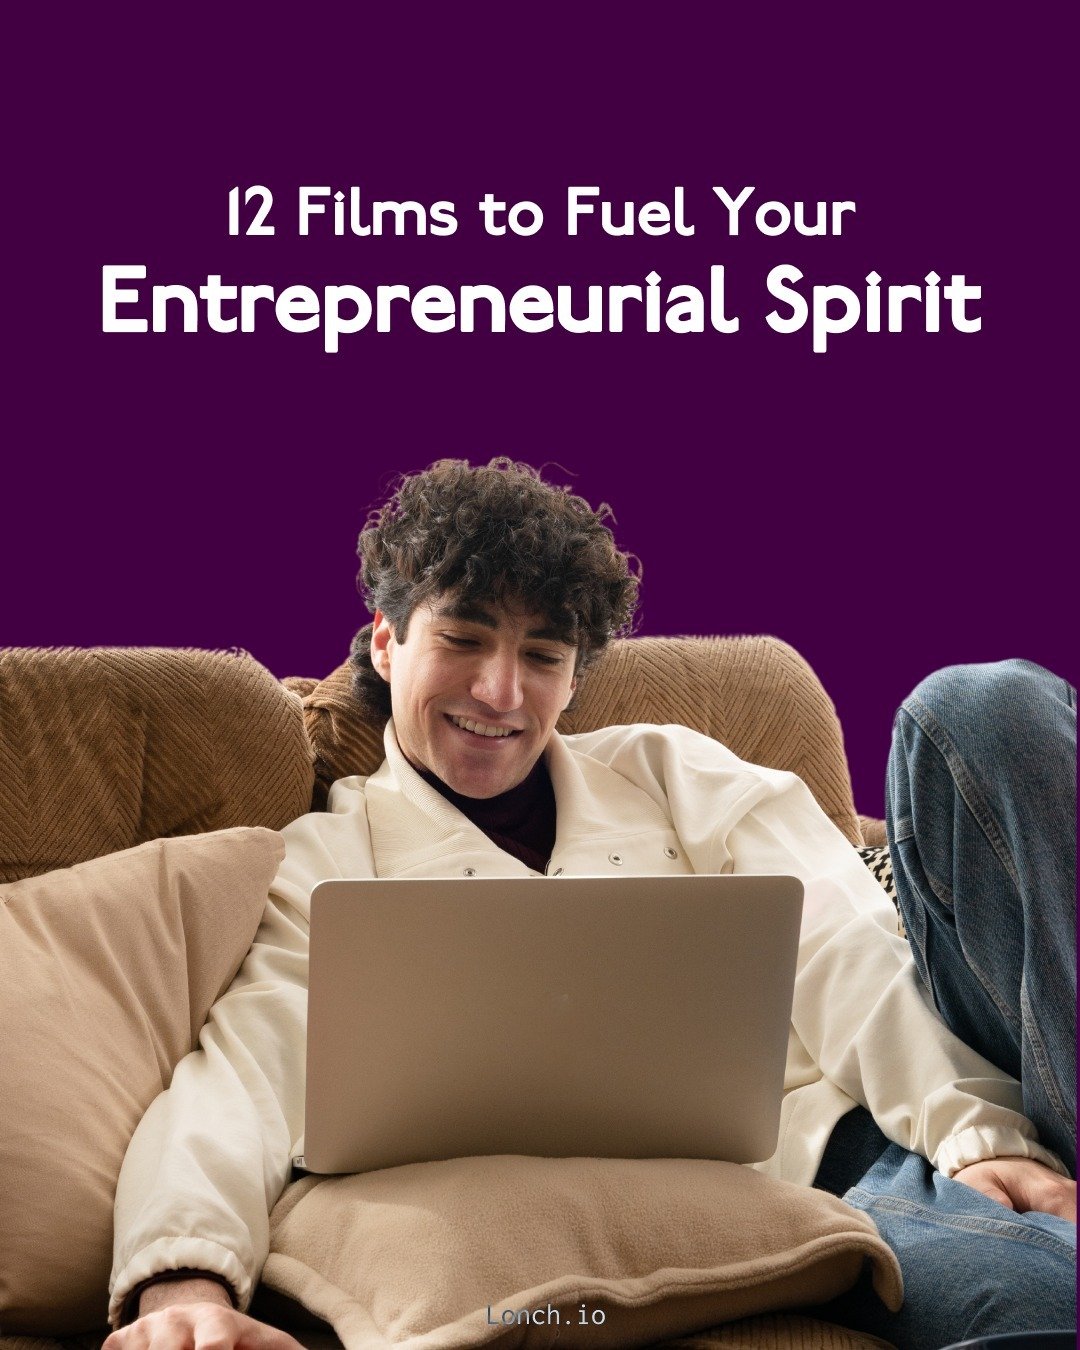 Need a hit of inspiration to crush your business goals? We've got you covered!

These 12 movies are packed with stories of triumph, grit, and out-of-the-box thinking that will light a under your entrepreneurial spirit.

What's your favorite movie for